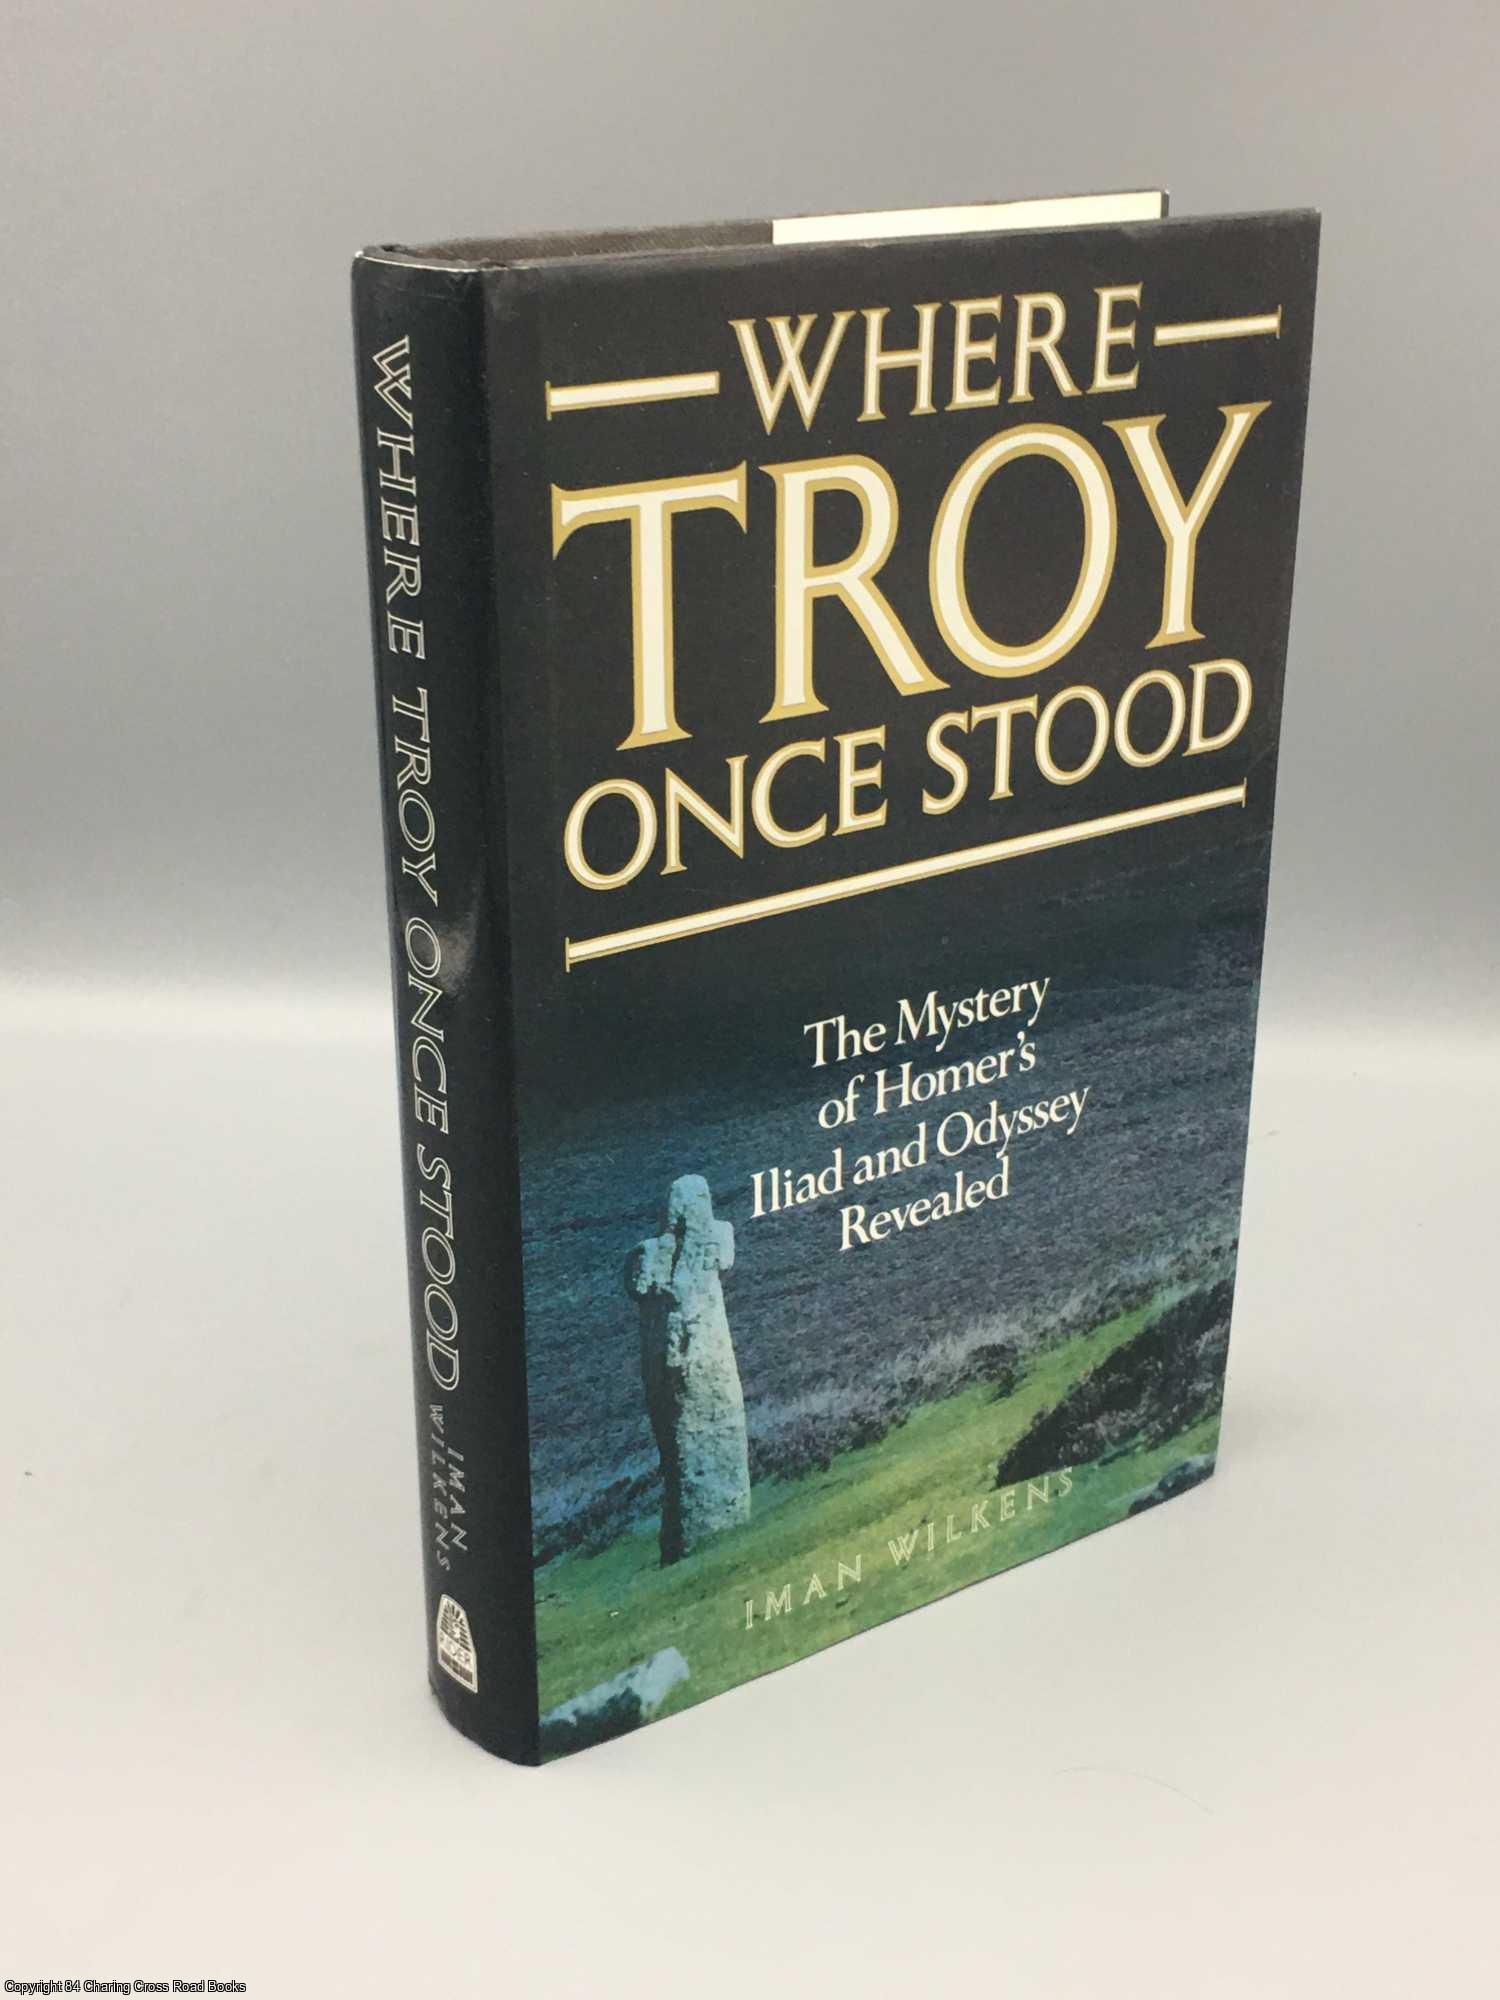 Wilkens, Iman J. - Where Troy Once Stood: The Mystery of Homer's Iliad Revealed